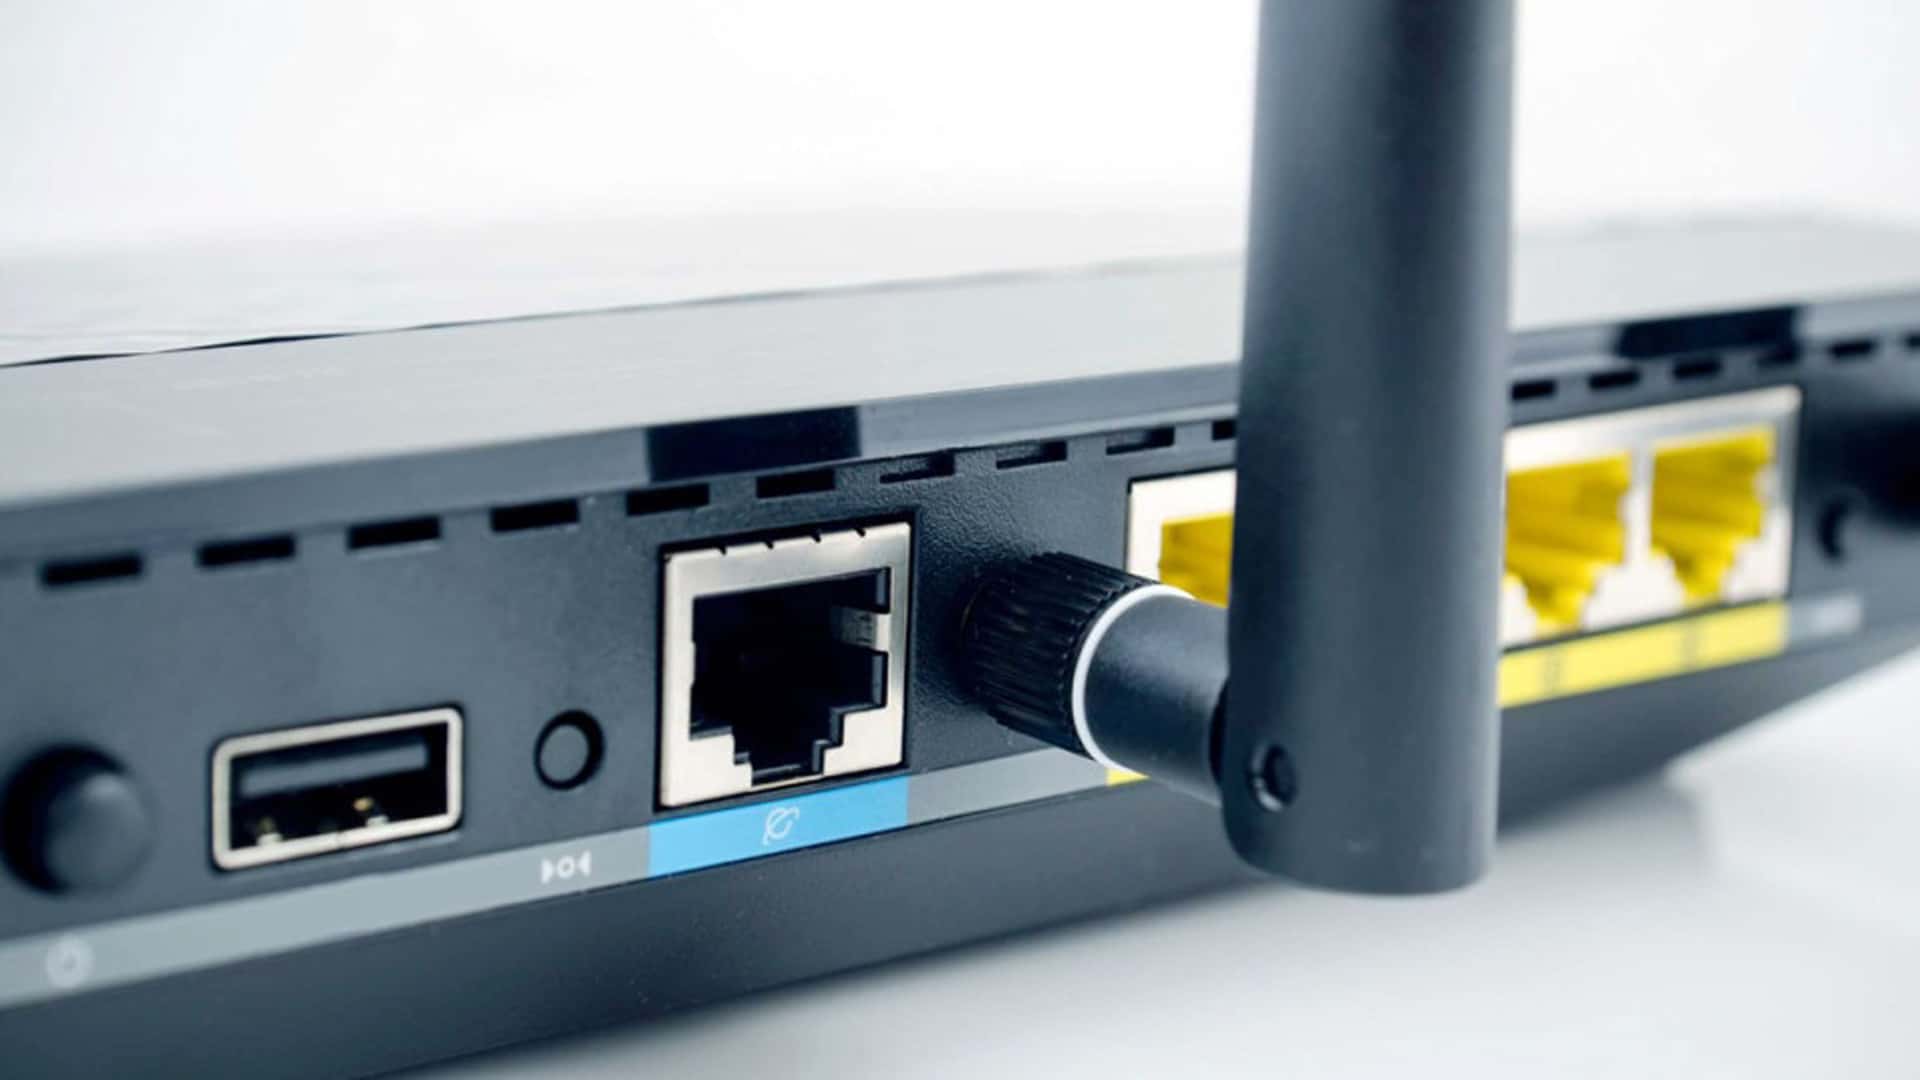 The best uses you can give to the USB port of your router